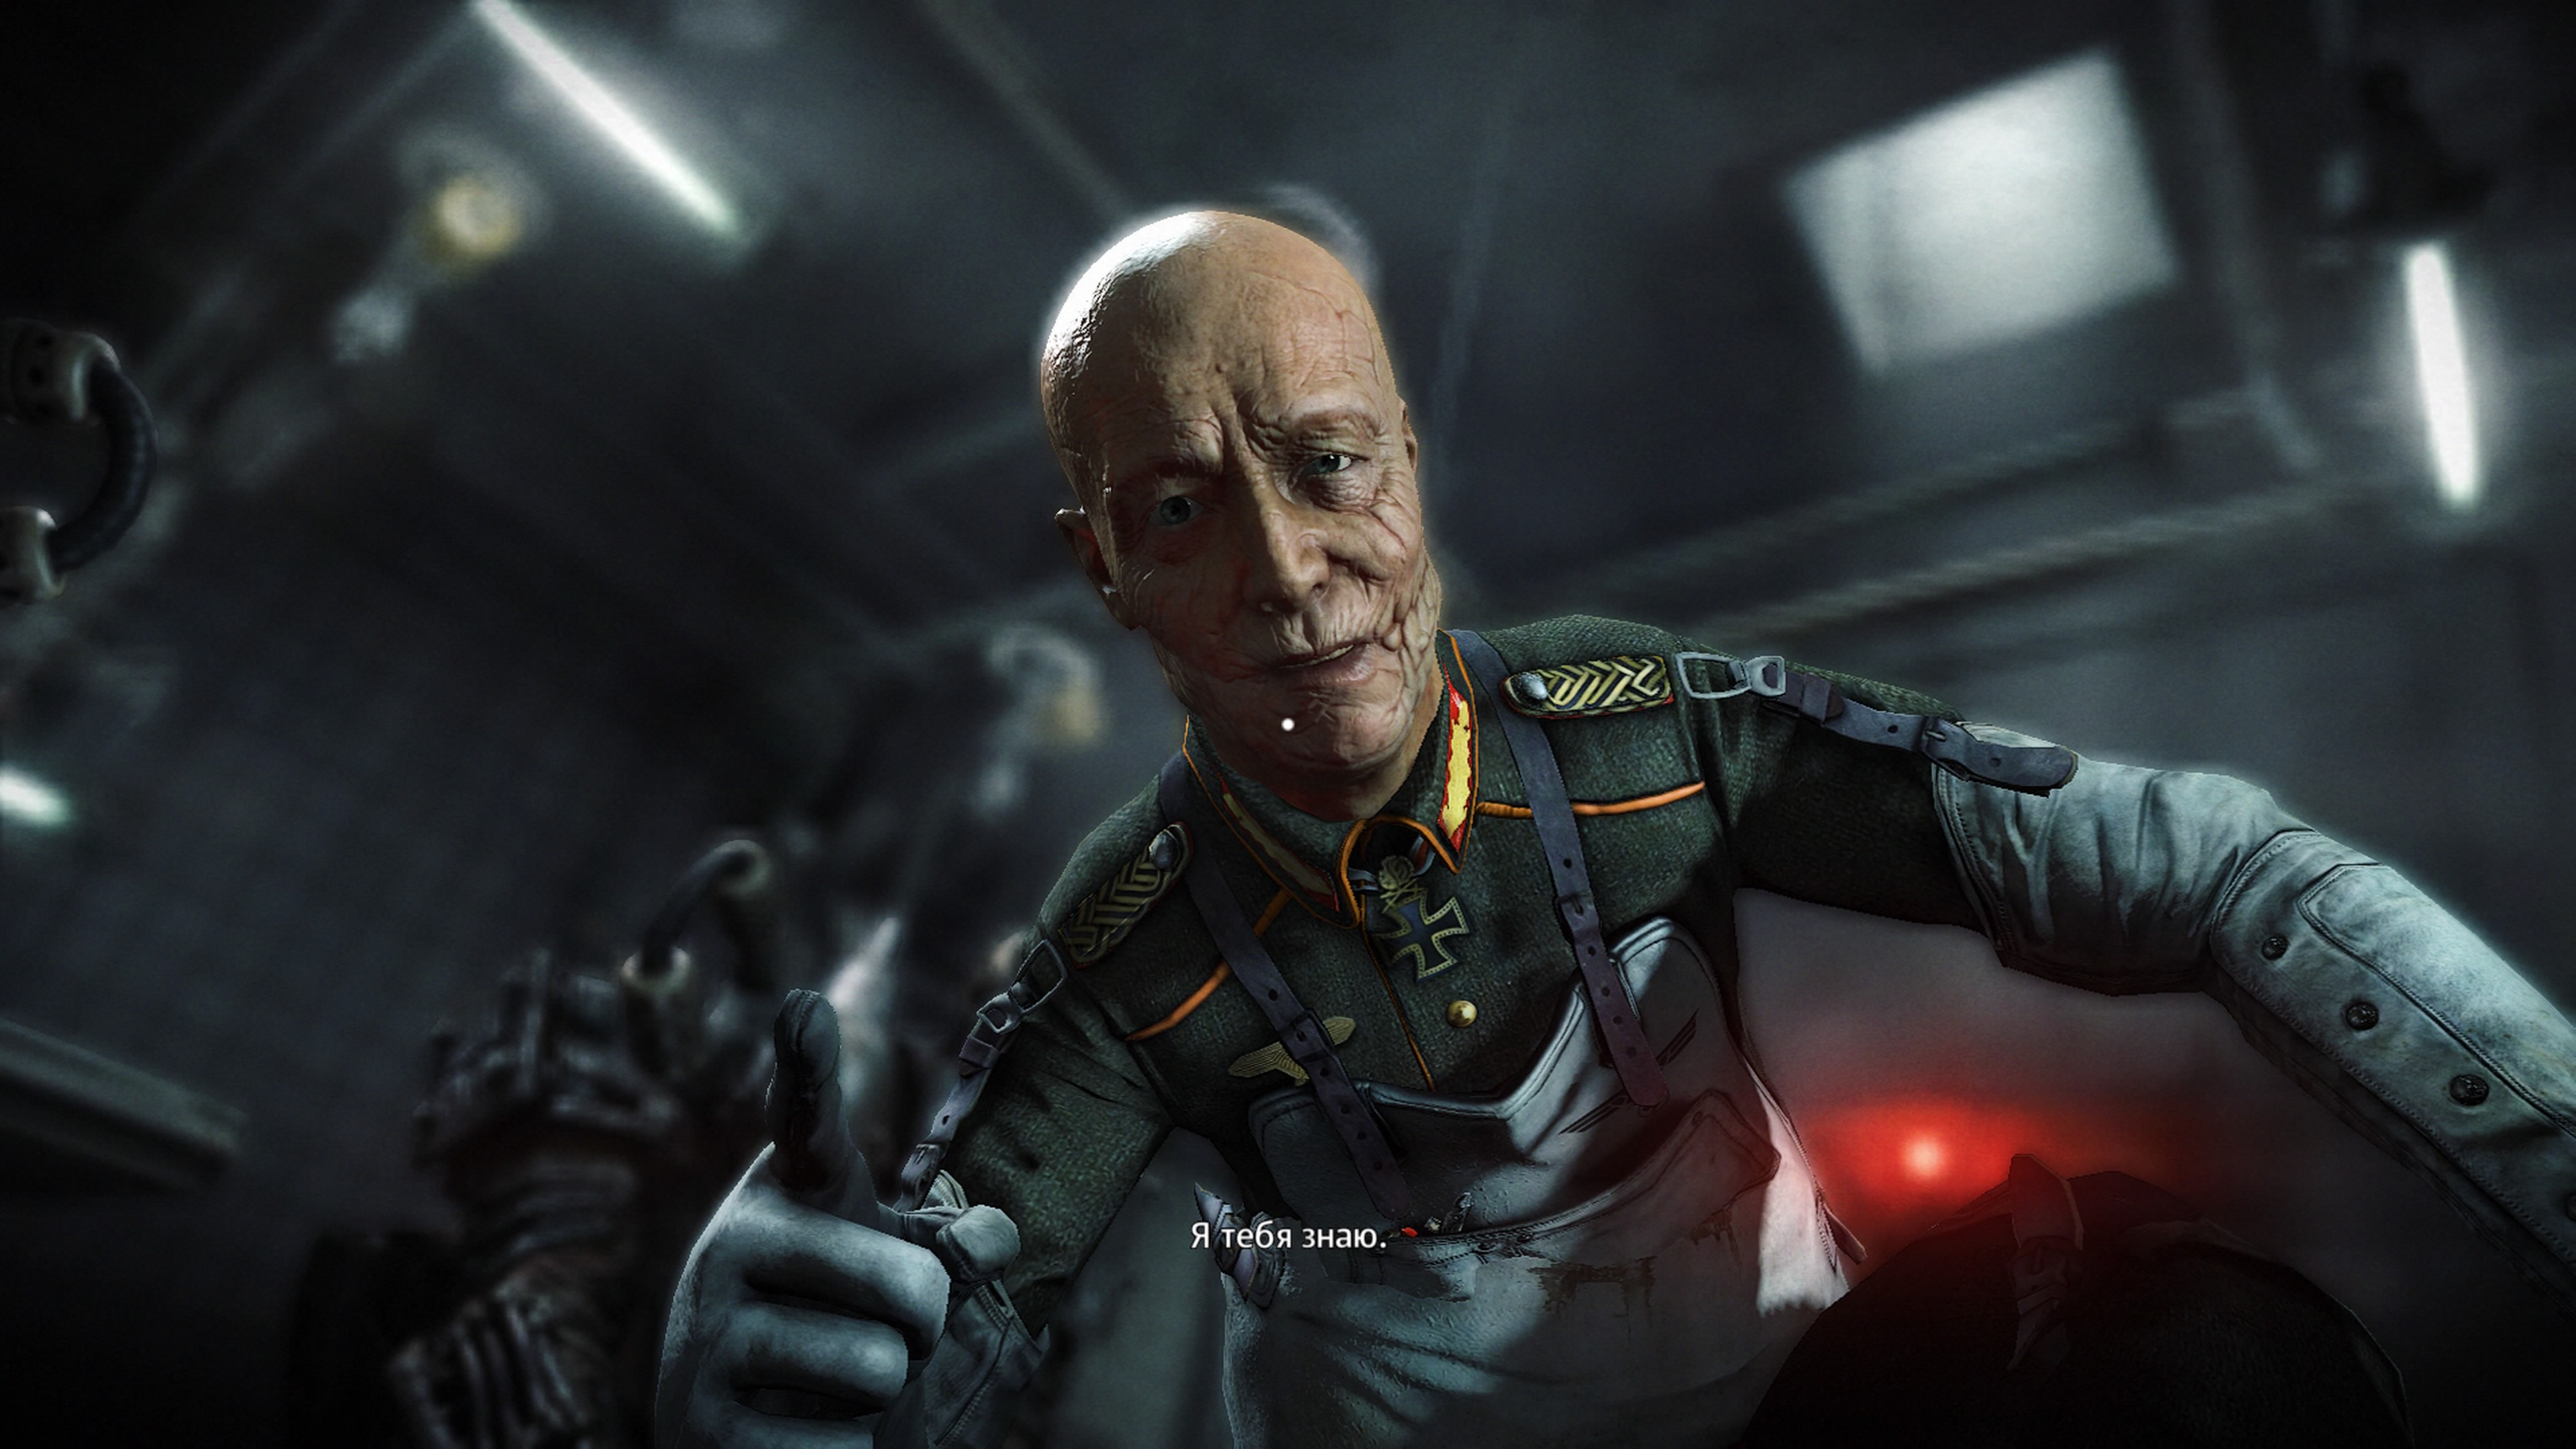 Have you new order. Wolfenstein: the New order. Wolfenstein игра 2014. Wolfenstein the New order 2.